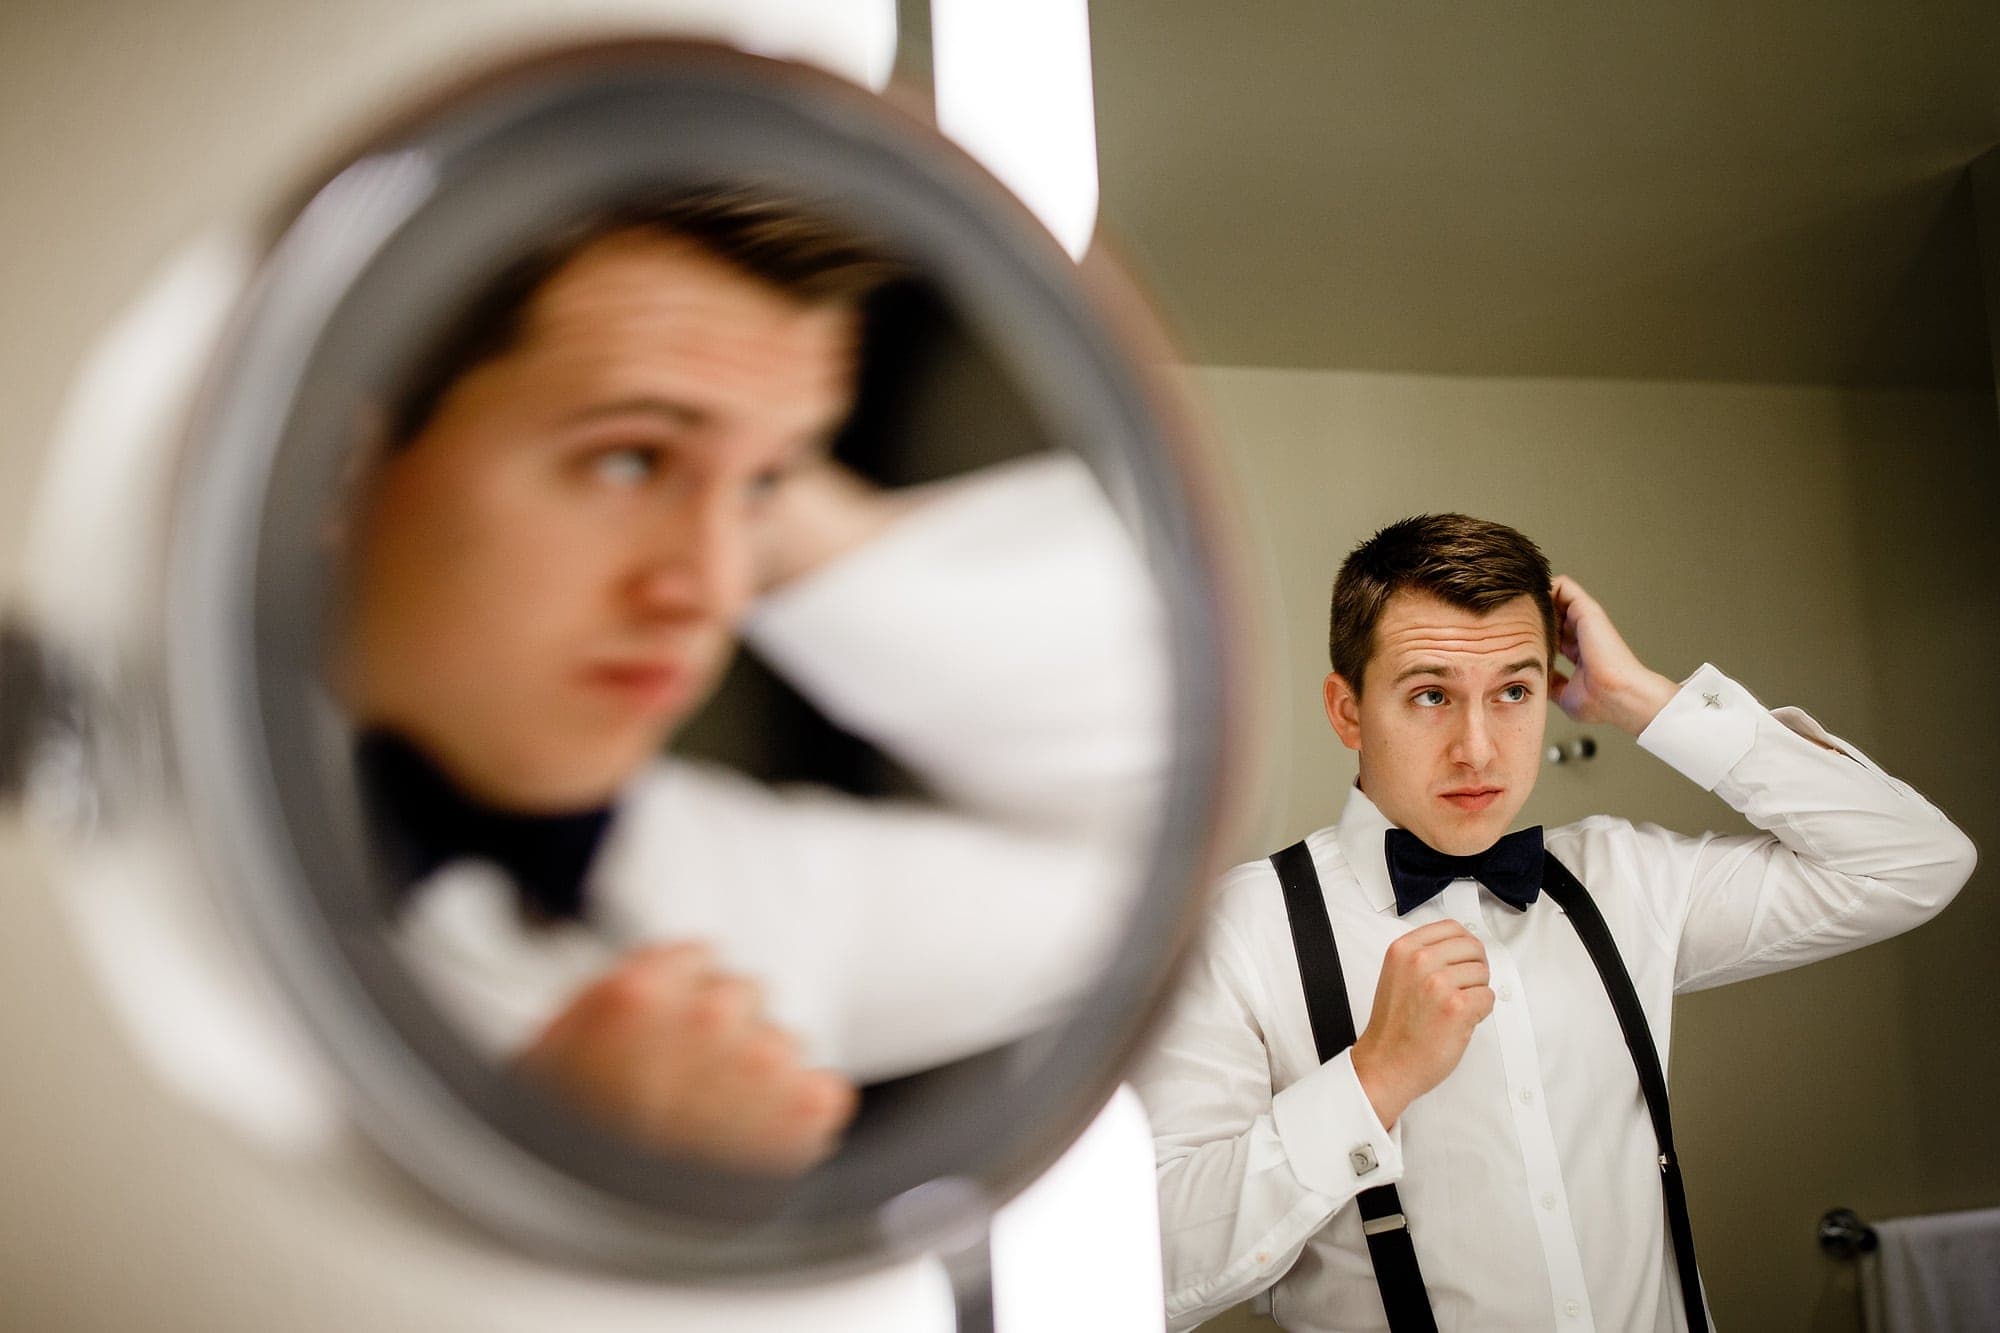 A groom is reflected in a parobolic mirror while fixing his hair at a hotel in Chicago.